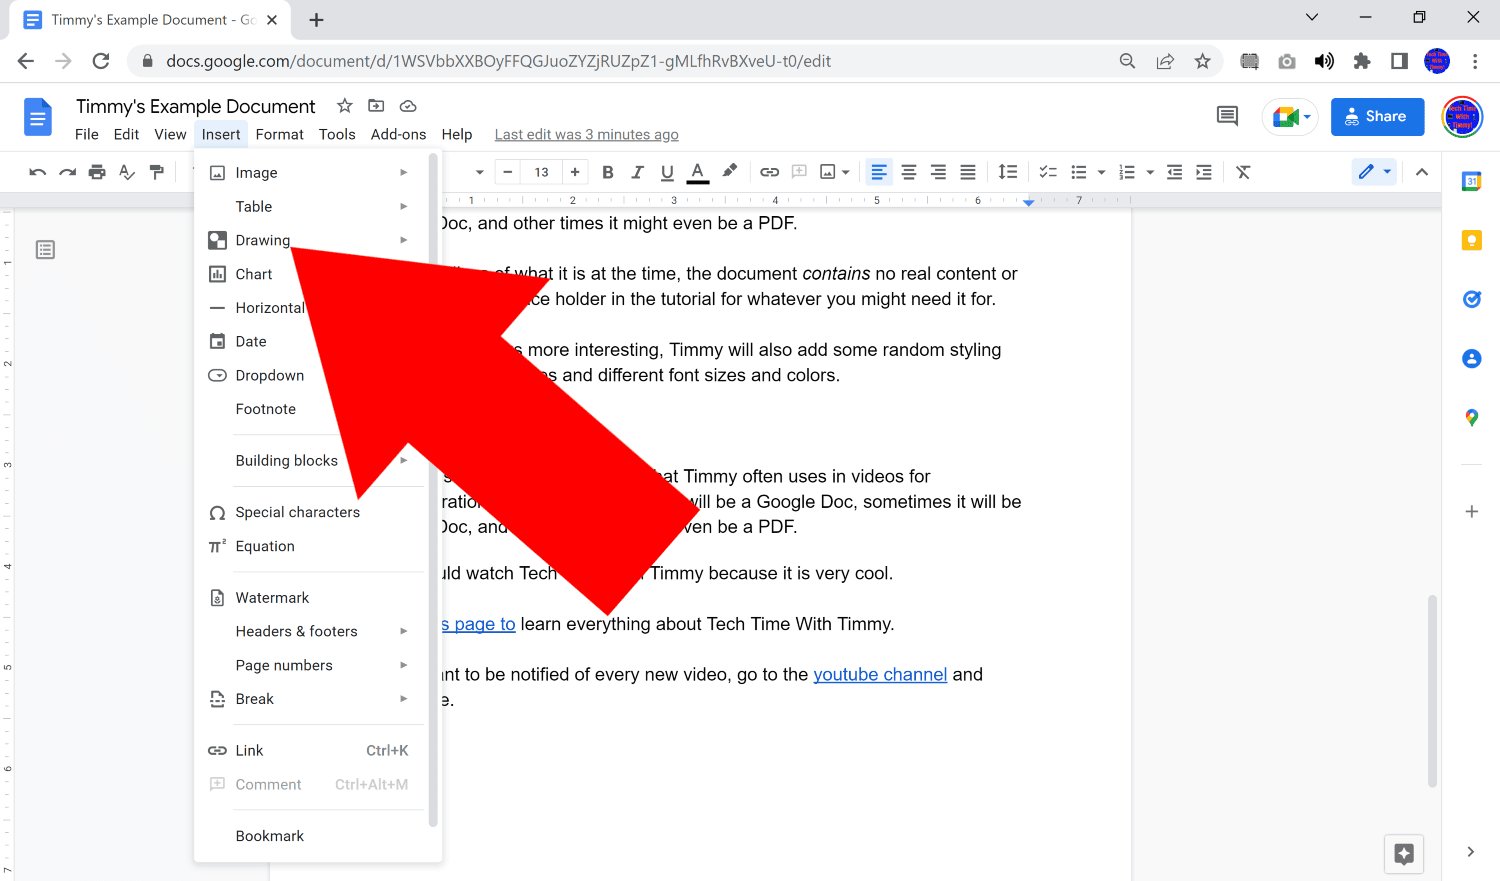 how to rotate image in google docs